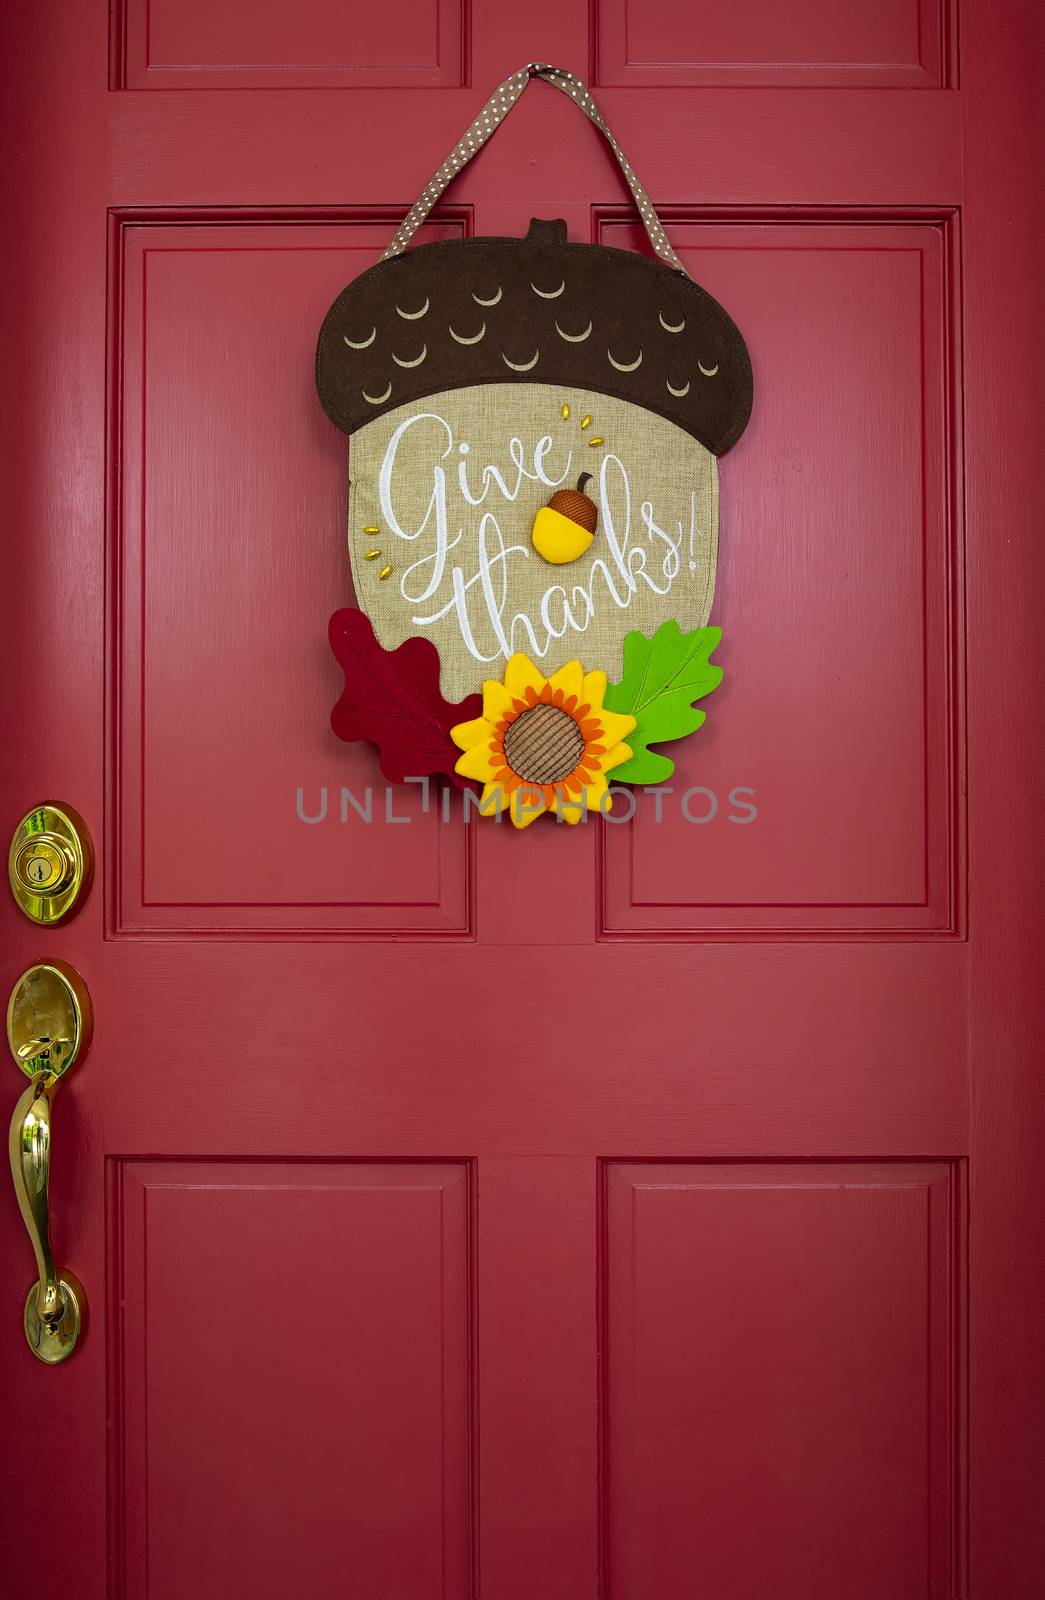 Fall-themed decoration hangs on red entrance door with brass handle.